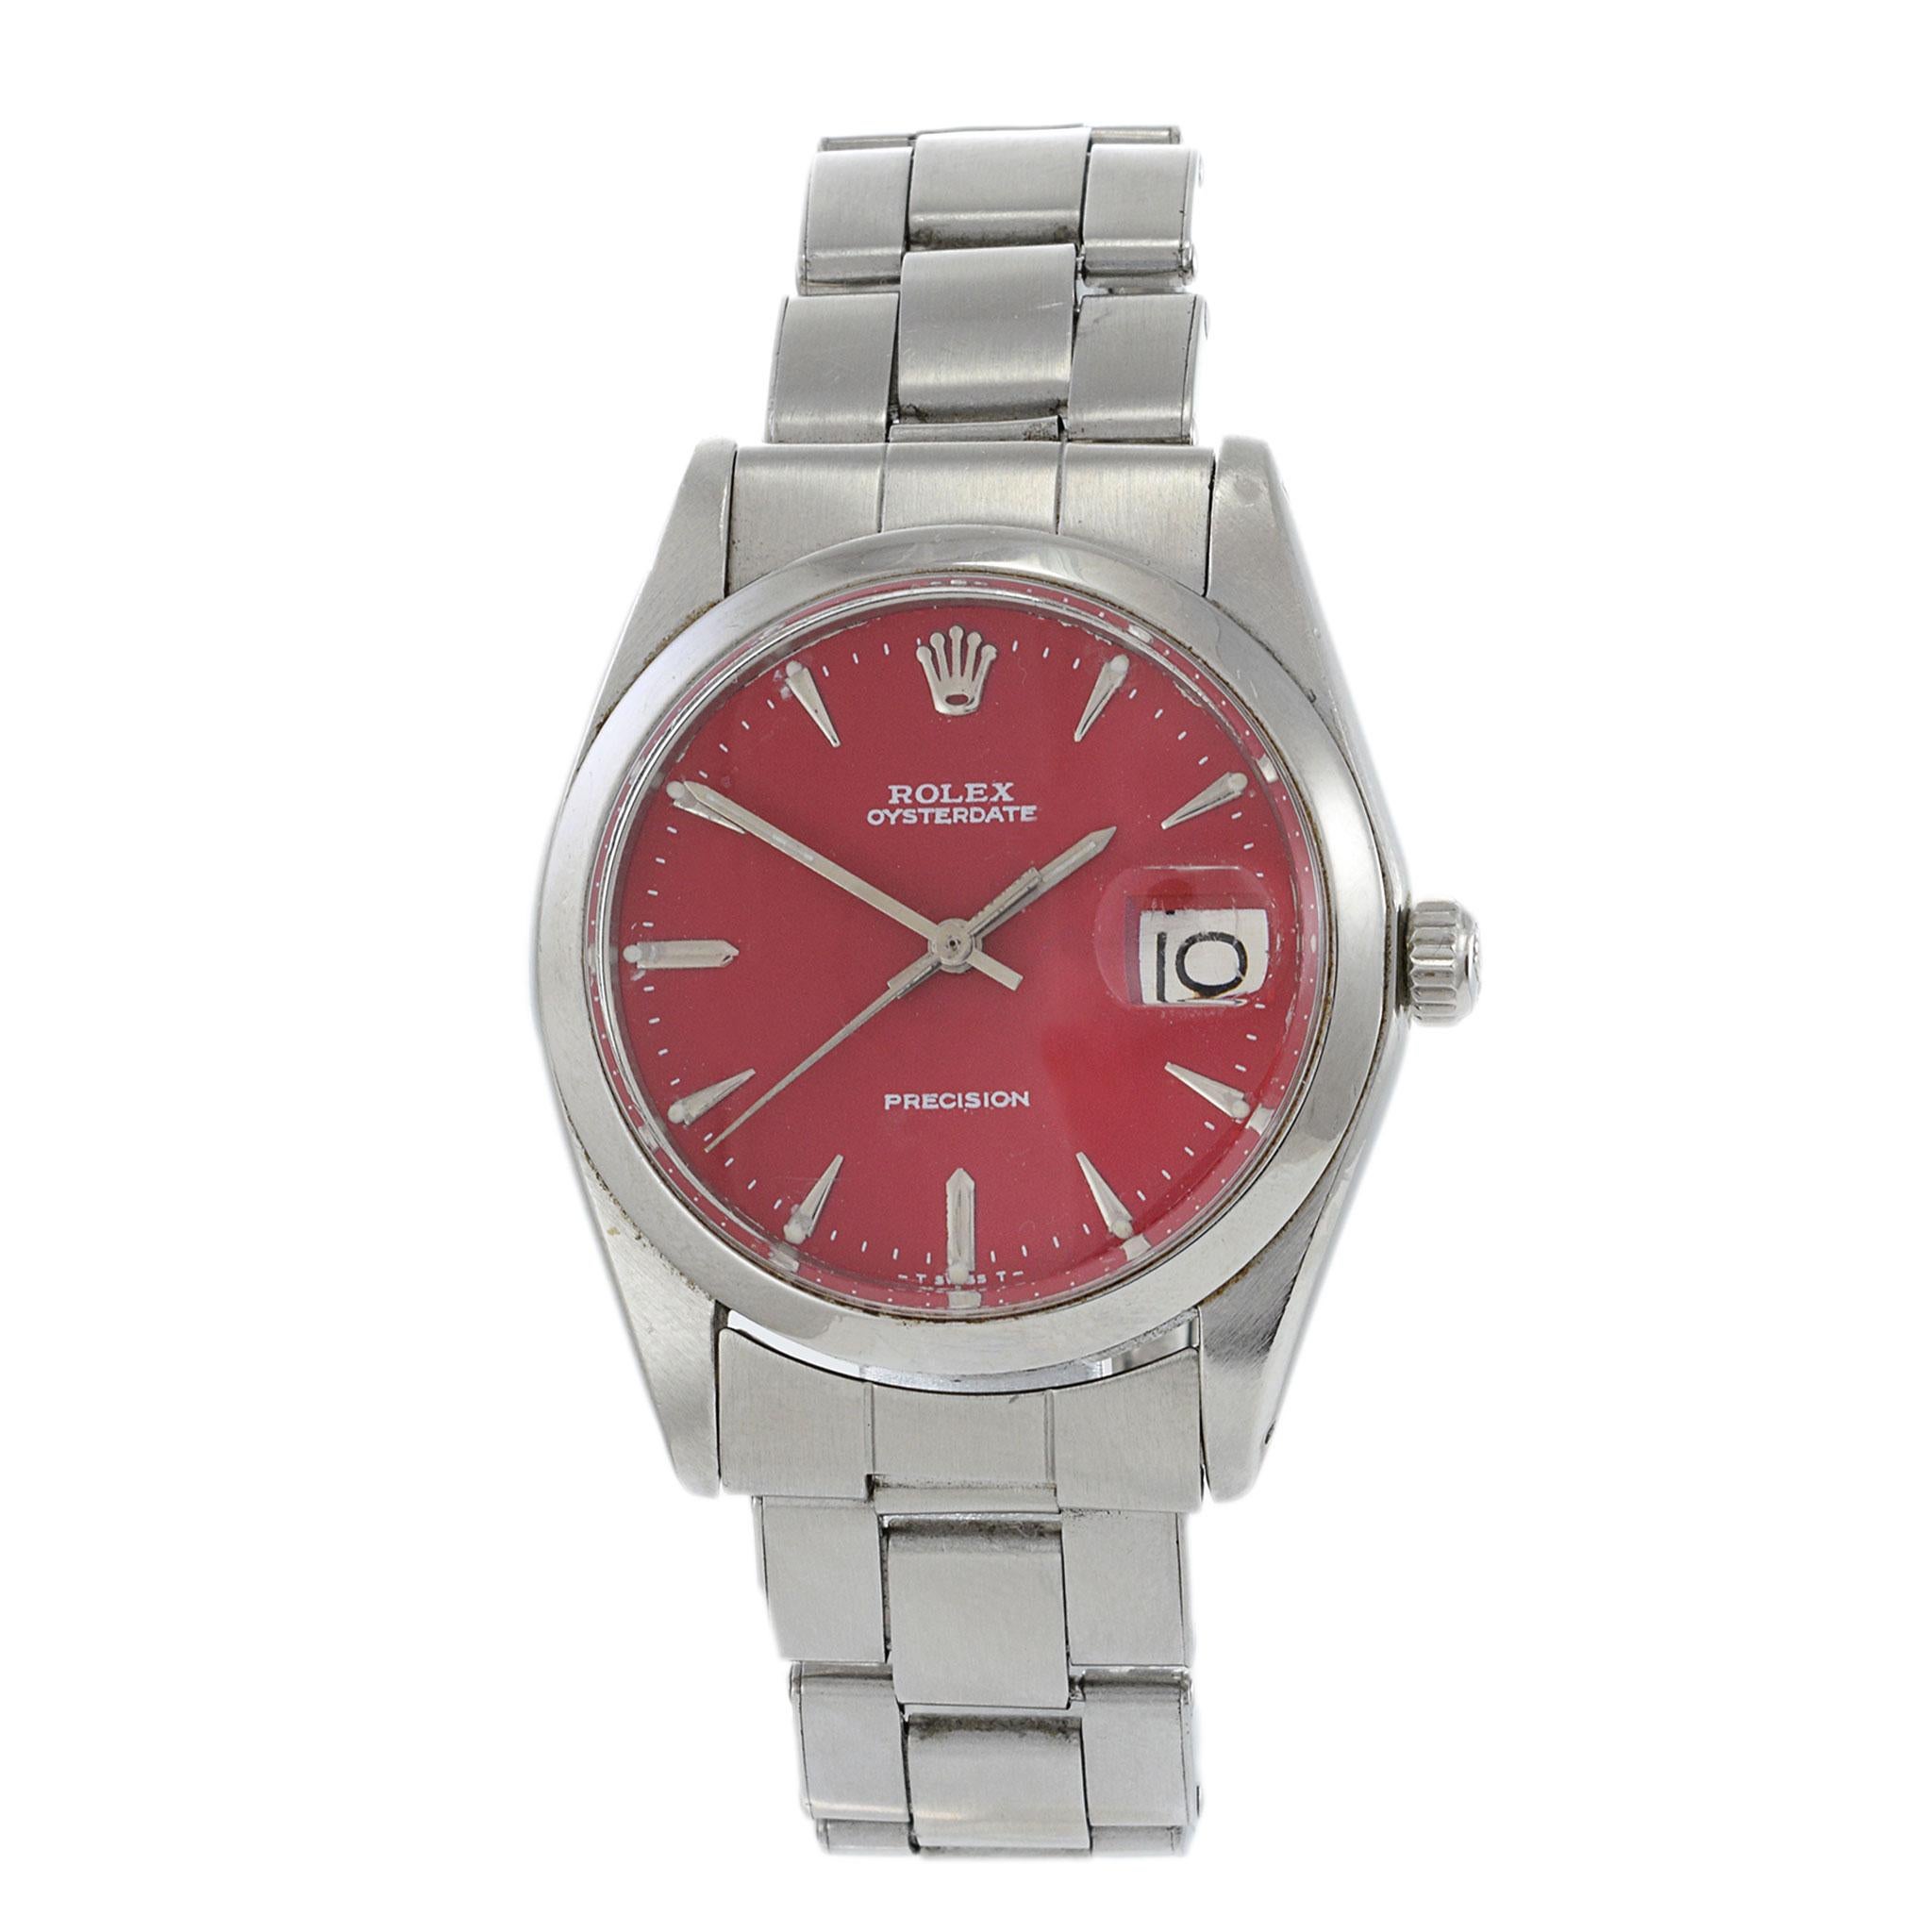 This vintage Rolex Oysterdate reference 6694 is from 1978 and remains a timeless classic suitable for both men and women. It features an manual wind movement, ensuring reliable timekeeping. The 34mm stainless steel case with a smooth bezel and